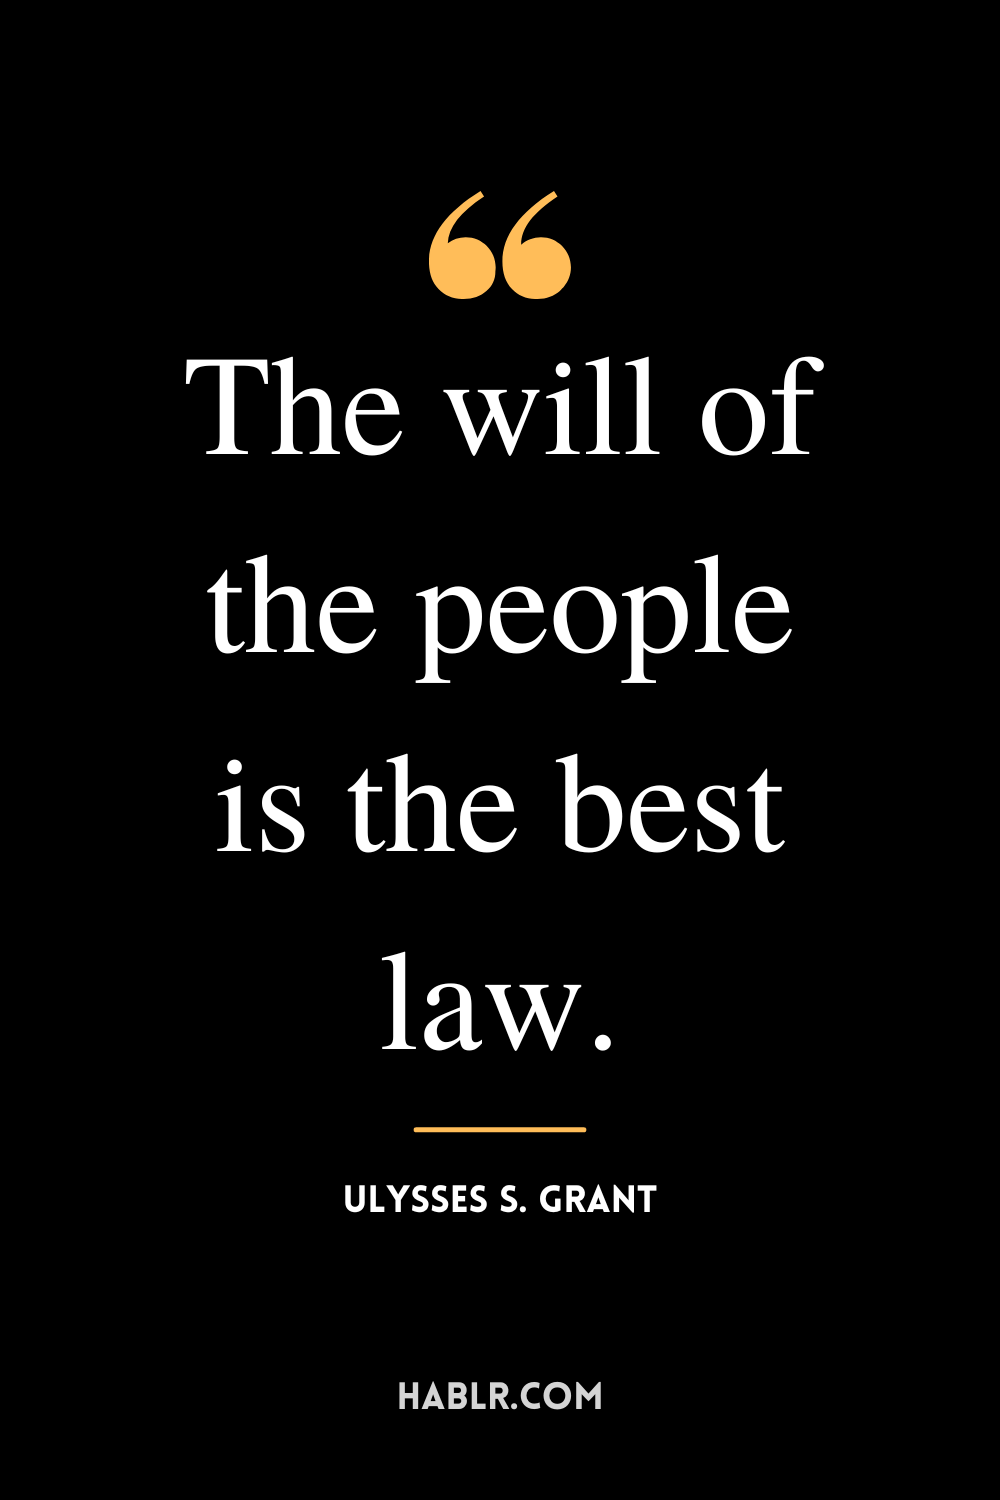 “The will of the people is the best law.” -Ulysses S. Grant